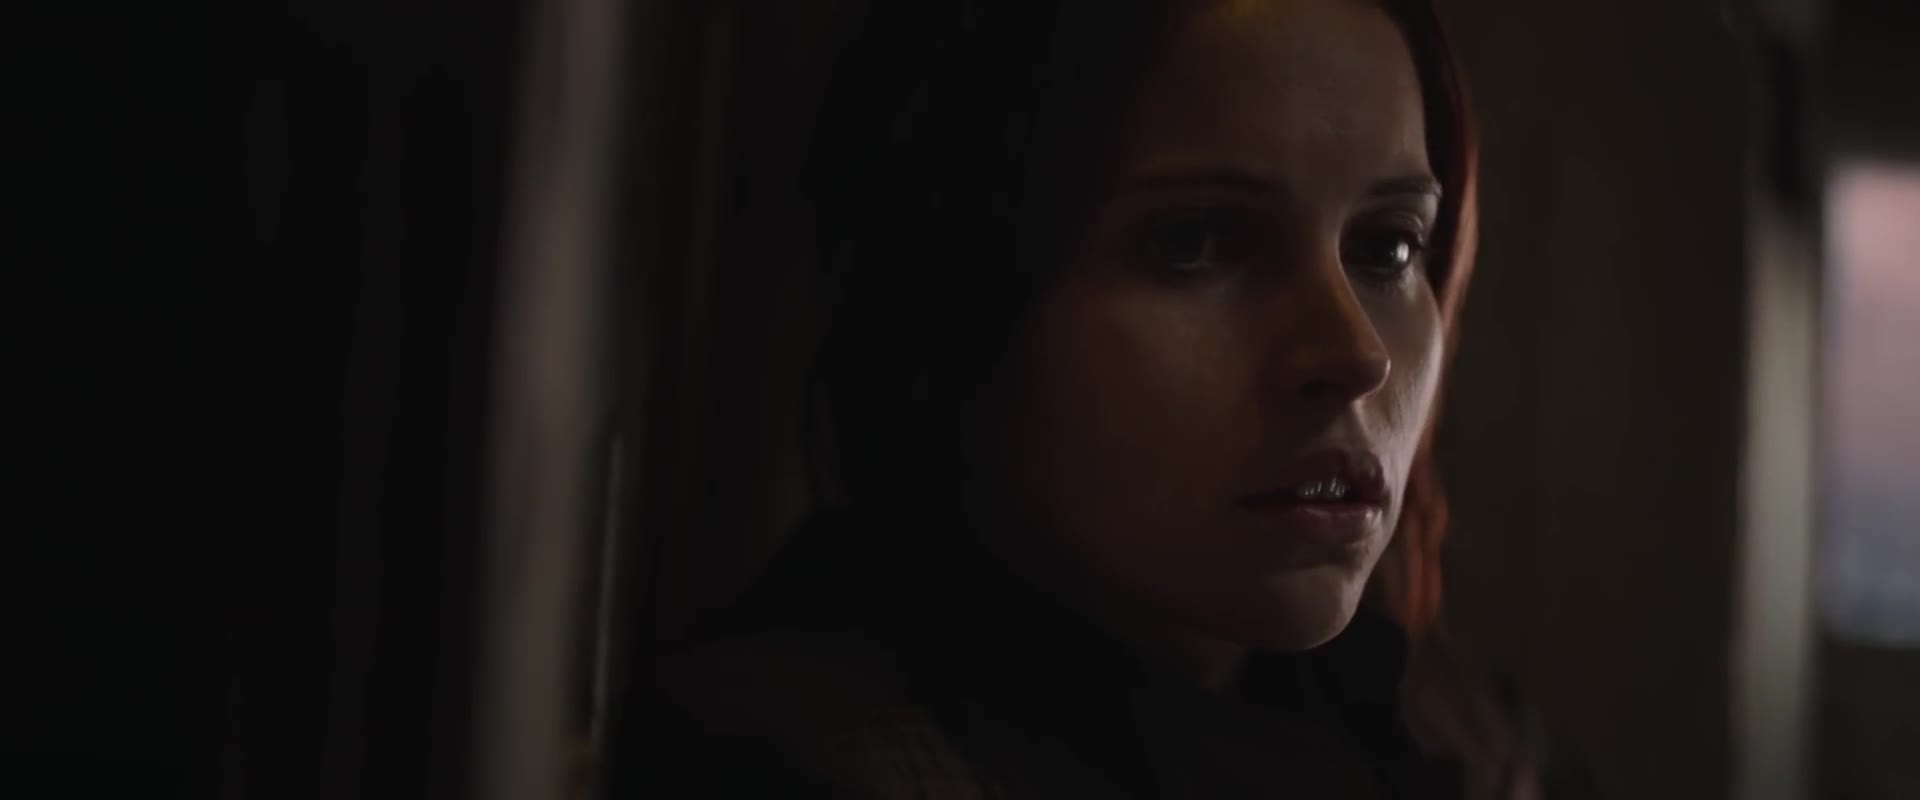 Rogue One: Star Wars Story: Trailer